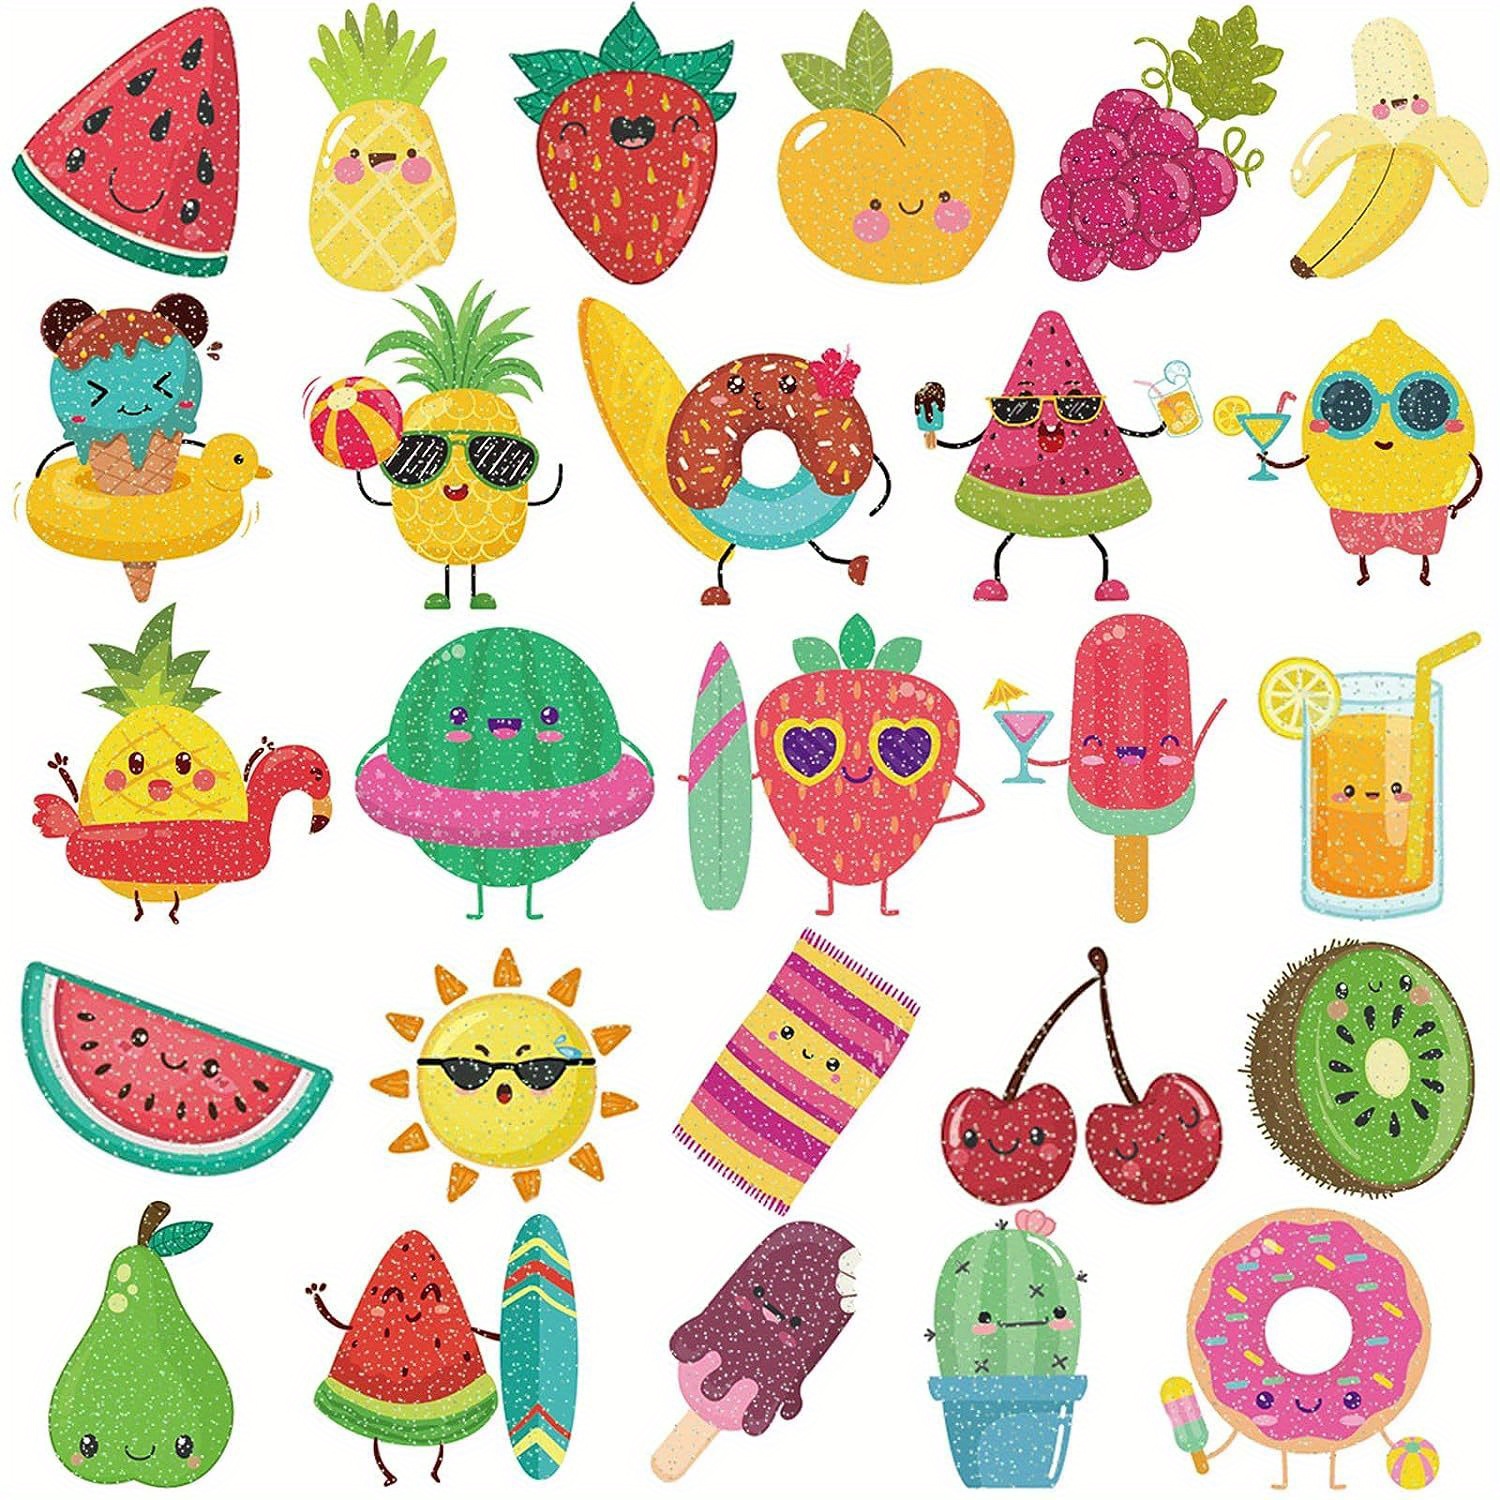 

10sheets Summer Glitter Fruit Temporary Tattoos For Boys And Girls - 110 Glitter Styles, Watermelon Strawberry Pineapple Tattoos Sticker For Birthday Party Decorations For Music Festival